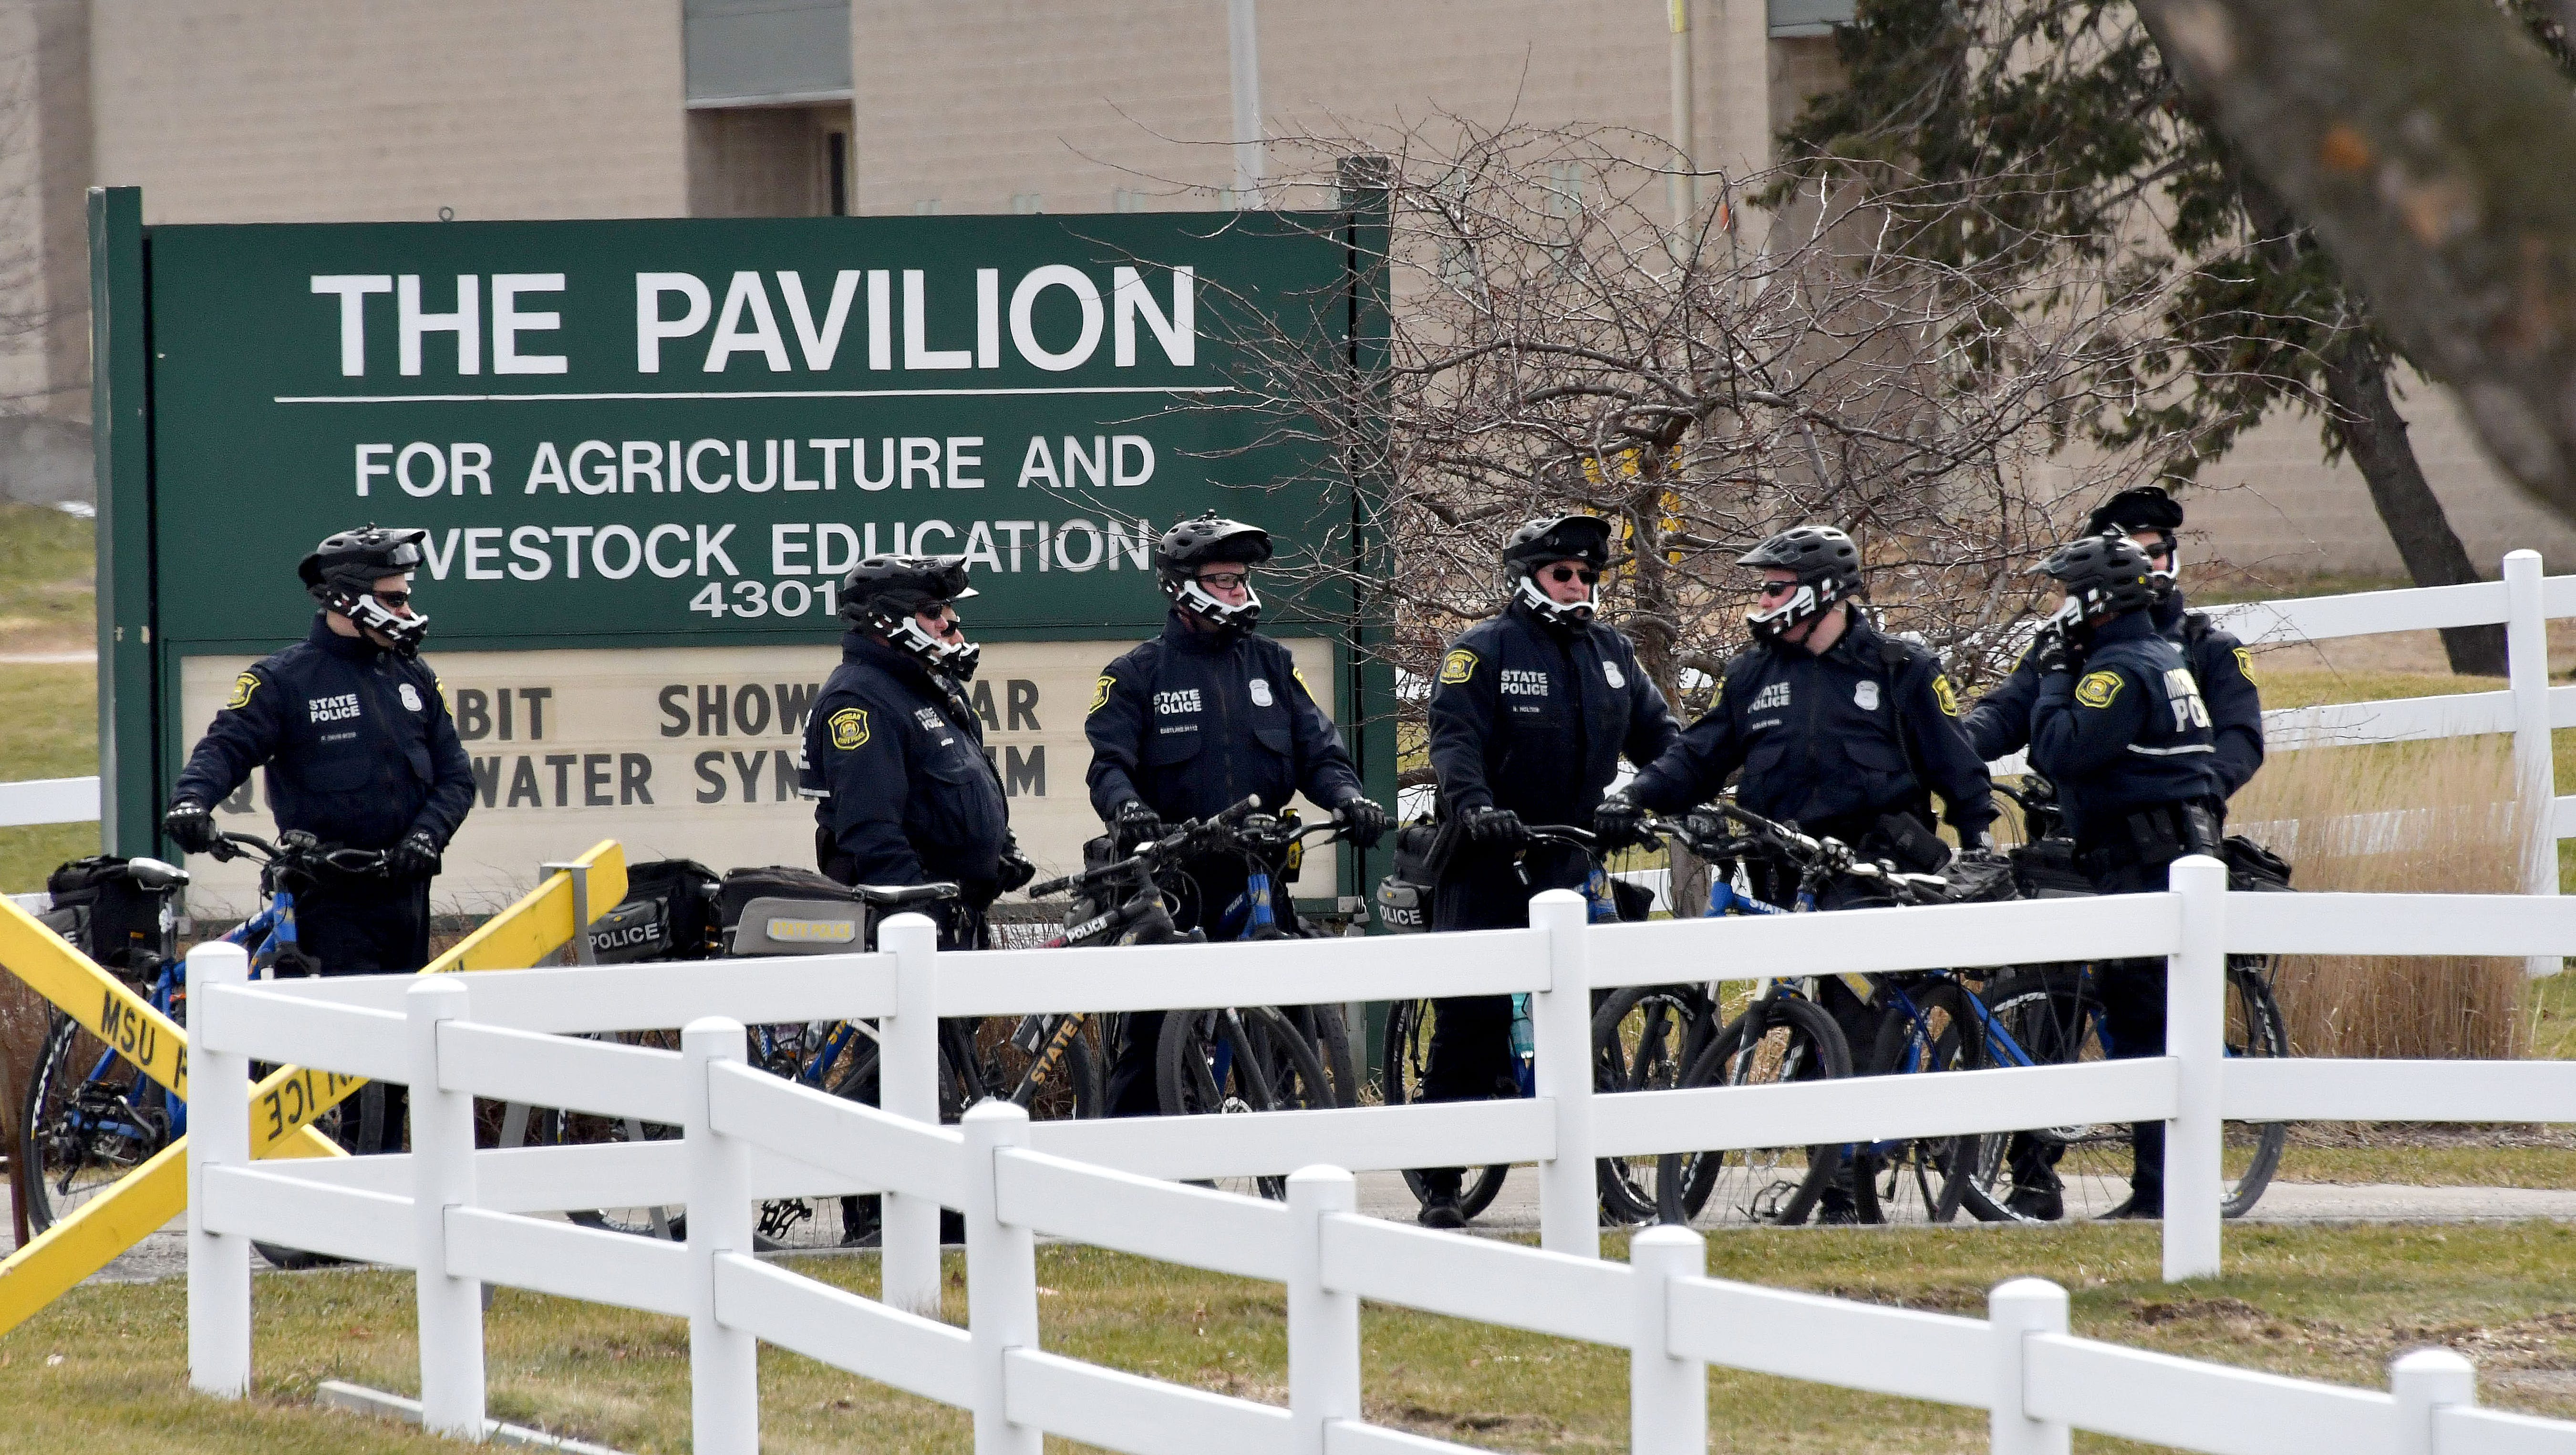 Michigan State Police officers on bicycles help separate protesters from the MSU Pavilion.